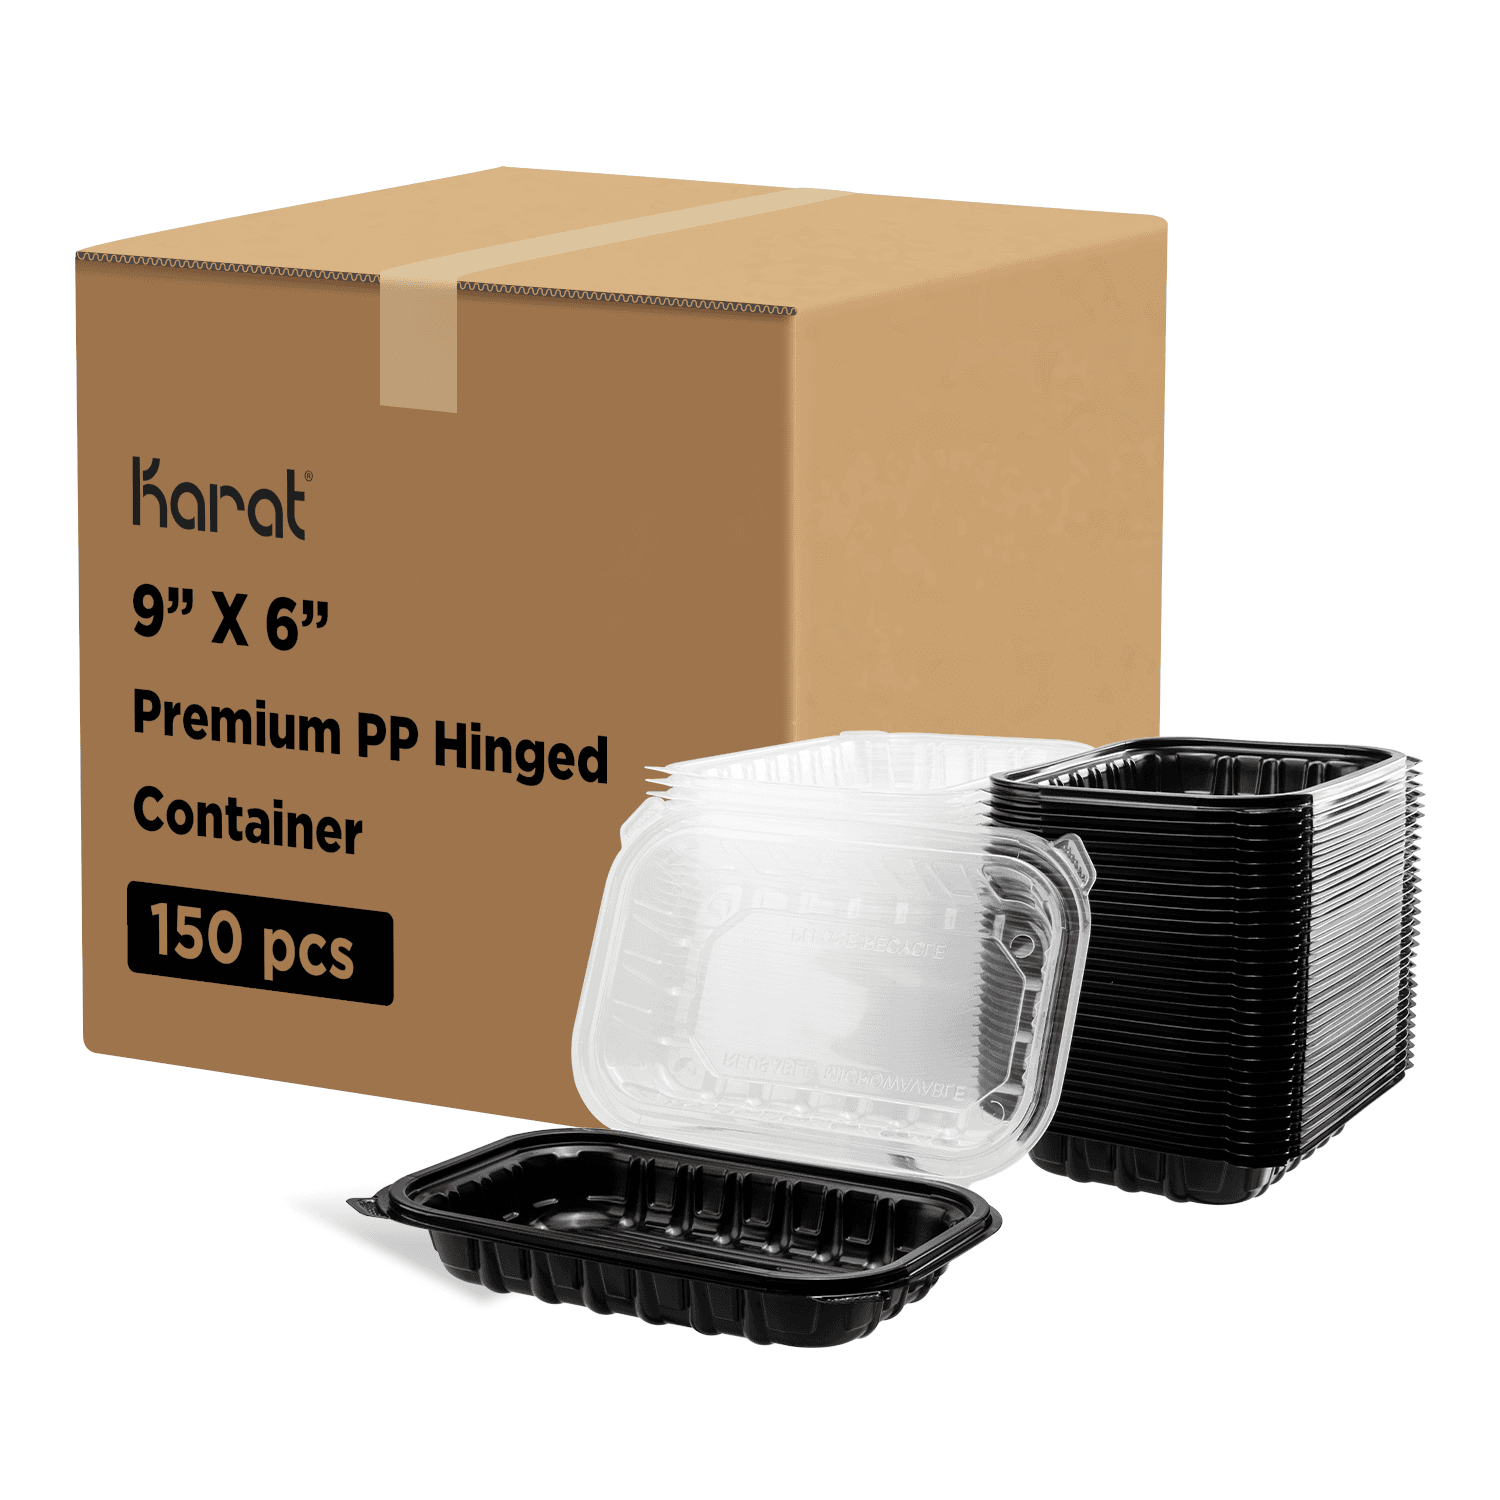 Karat 9"x 6" Premium PP Hinged Container stacked next to packaging